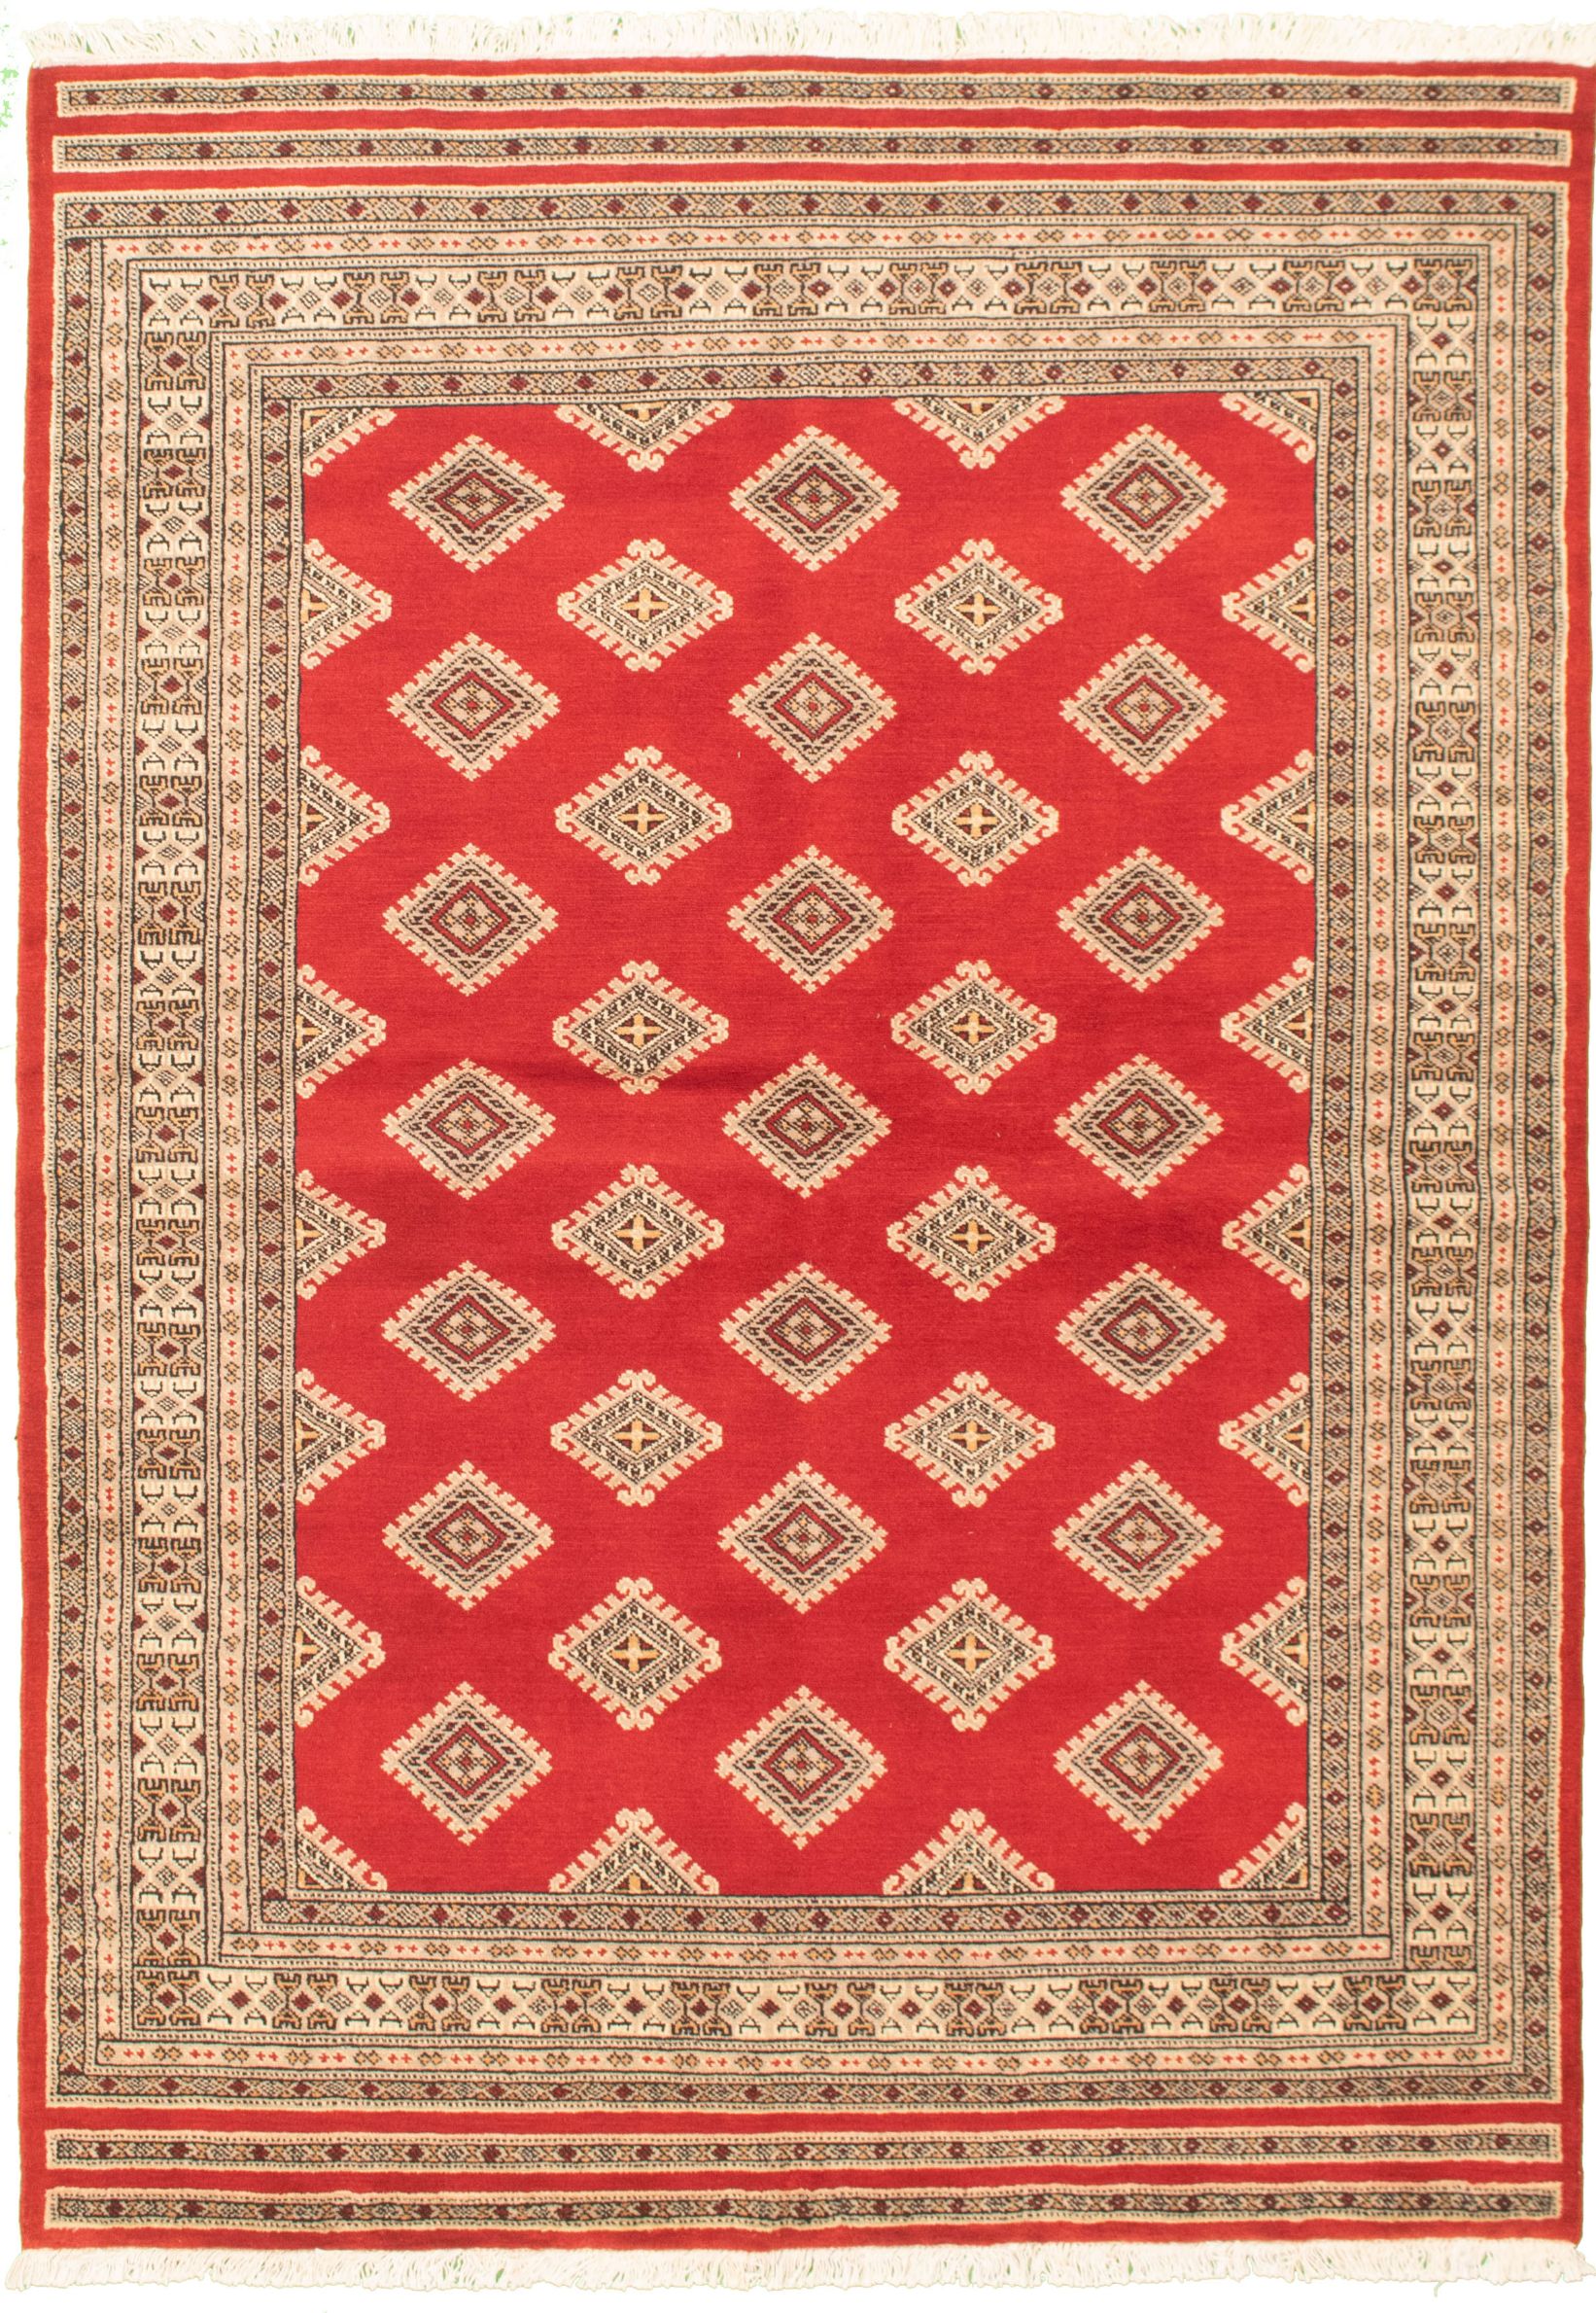 Hand-knotted Finest Peshawar Bokhara Red Wool Rug 5'7" x 8'4" Size: 5'7" x 8'4"  